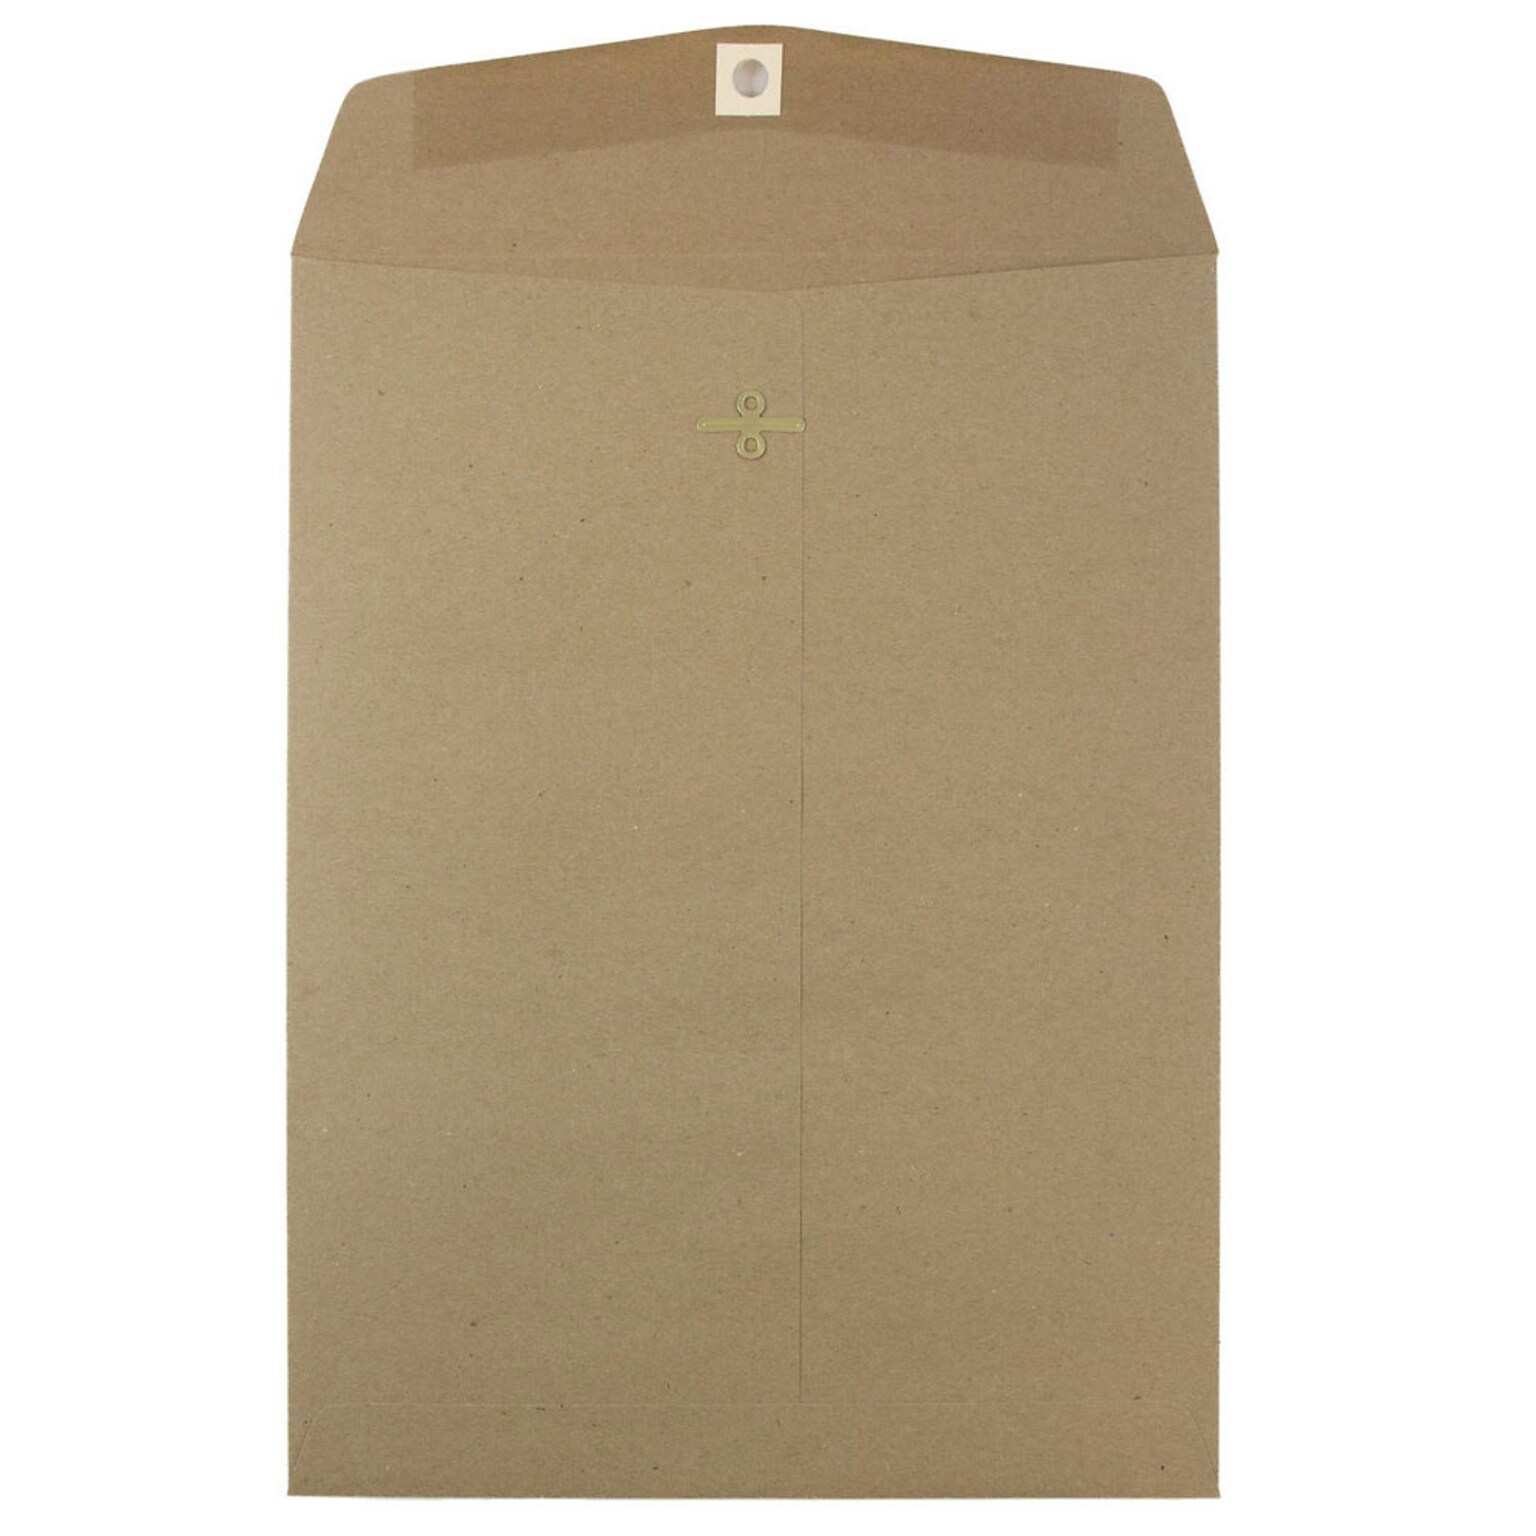 JAM Paper 9 x 12 Open End Catalog Envelopes with Clasp Closure, Brown Kraft Paper Bag, 100/Pack (563120849B)